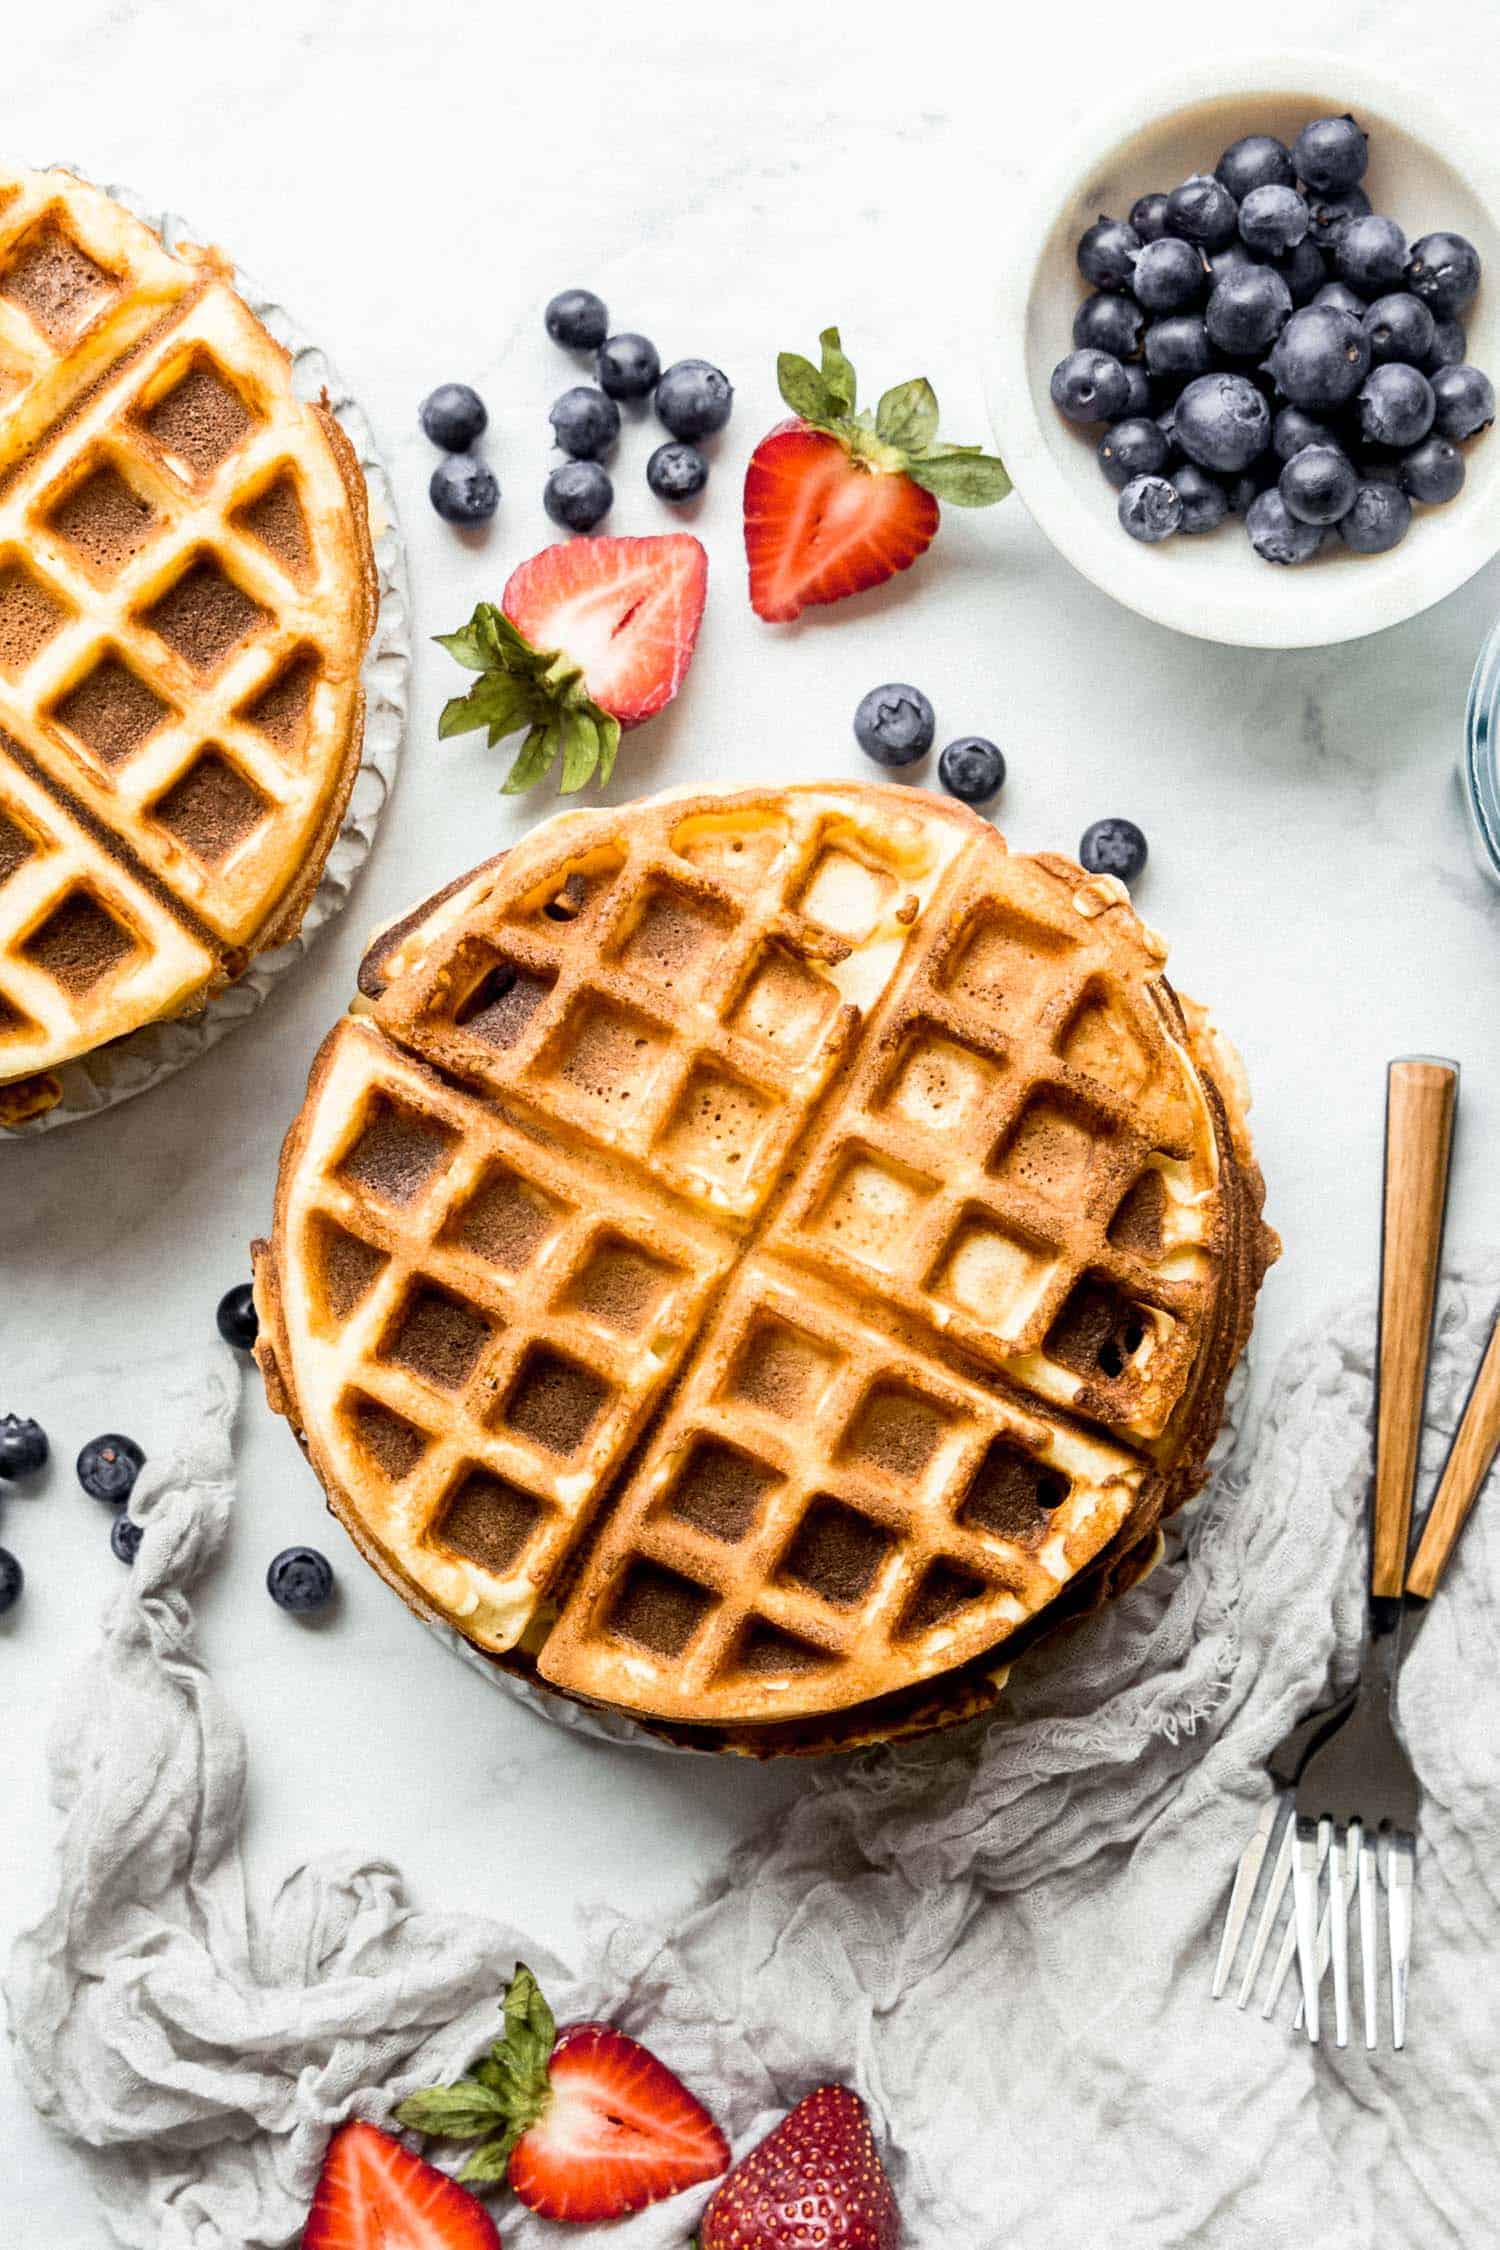 plain paleo waffles on a plate with blueberries on the side